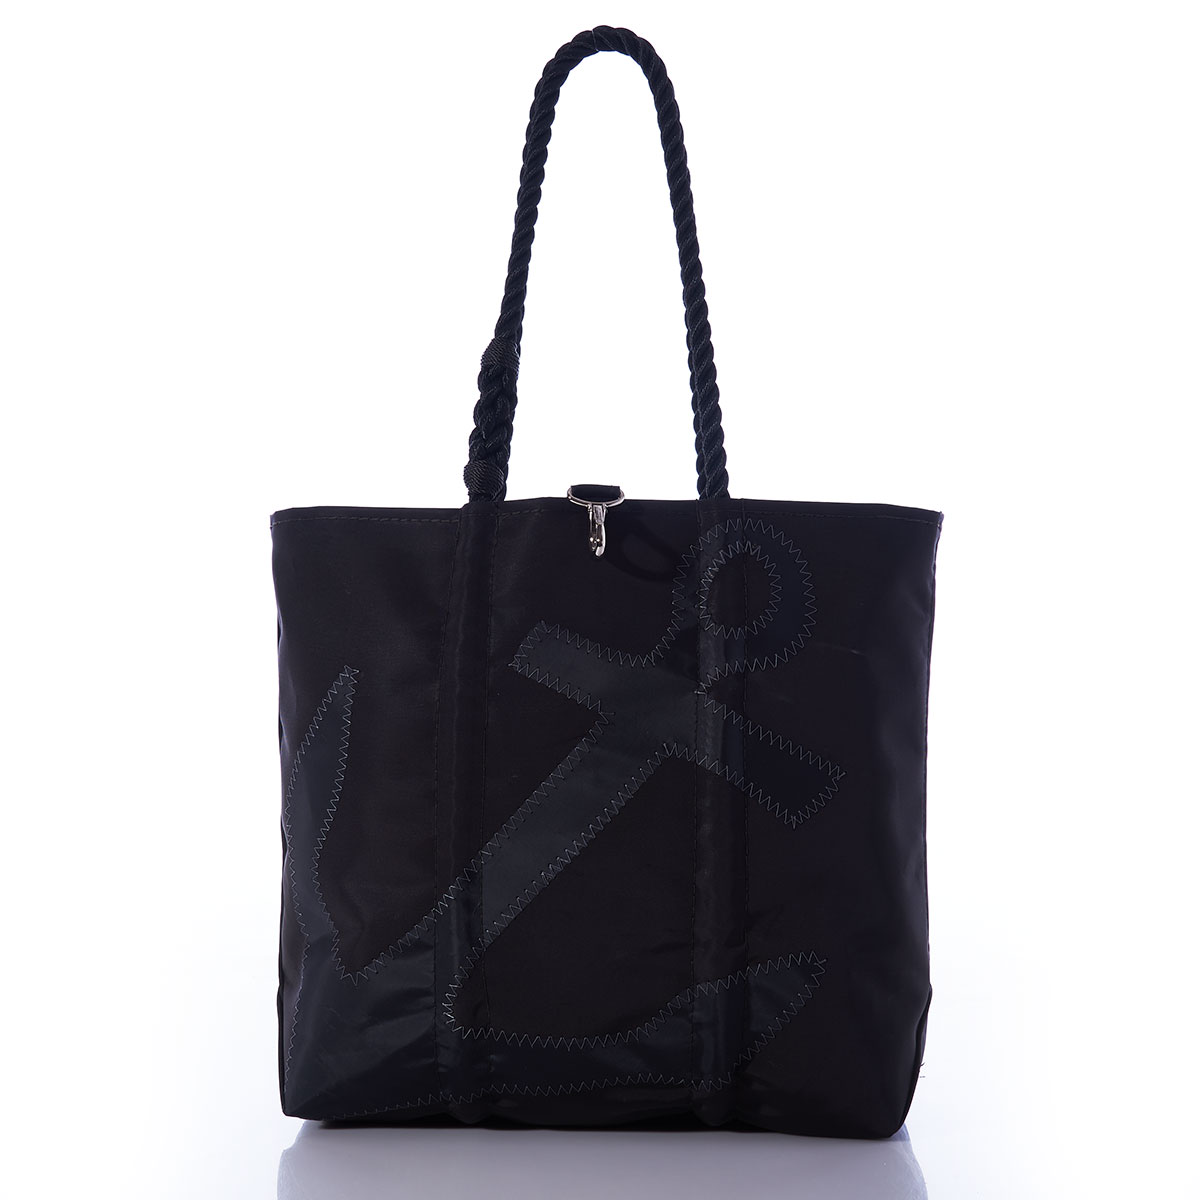 black recycled sail cloth tote with a black anchor applique and black rope handles and metal top clasp closure